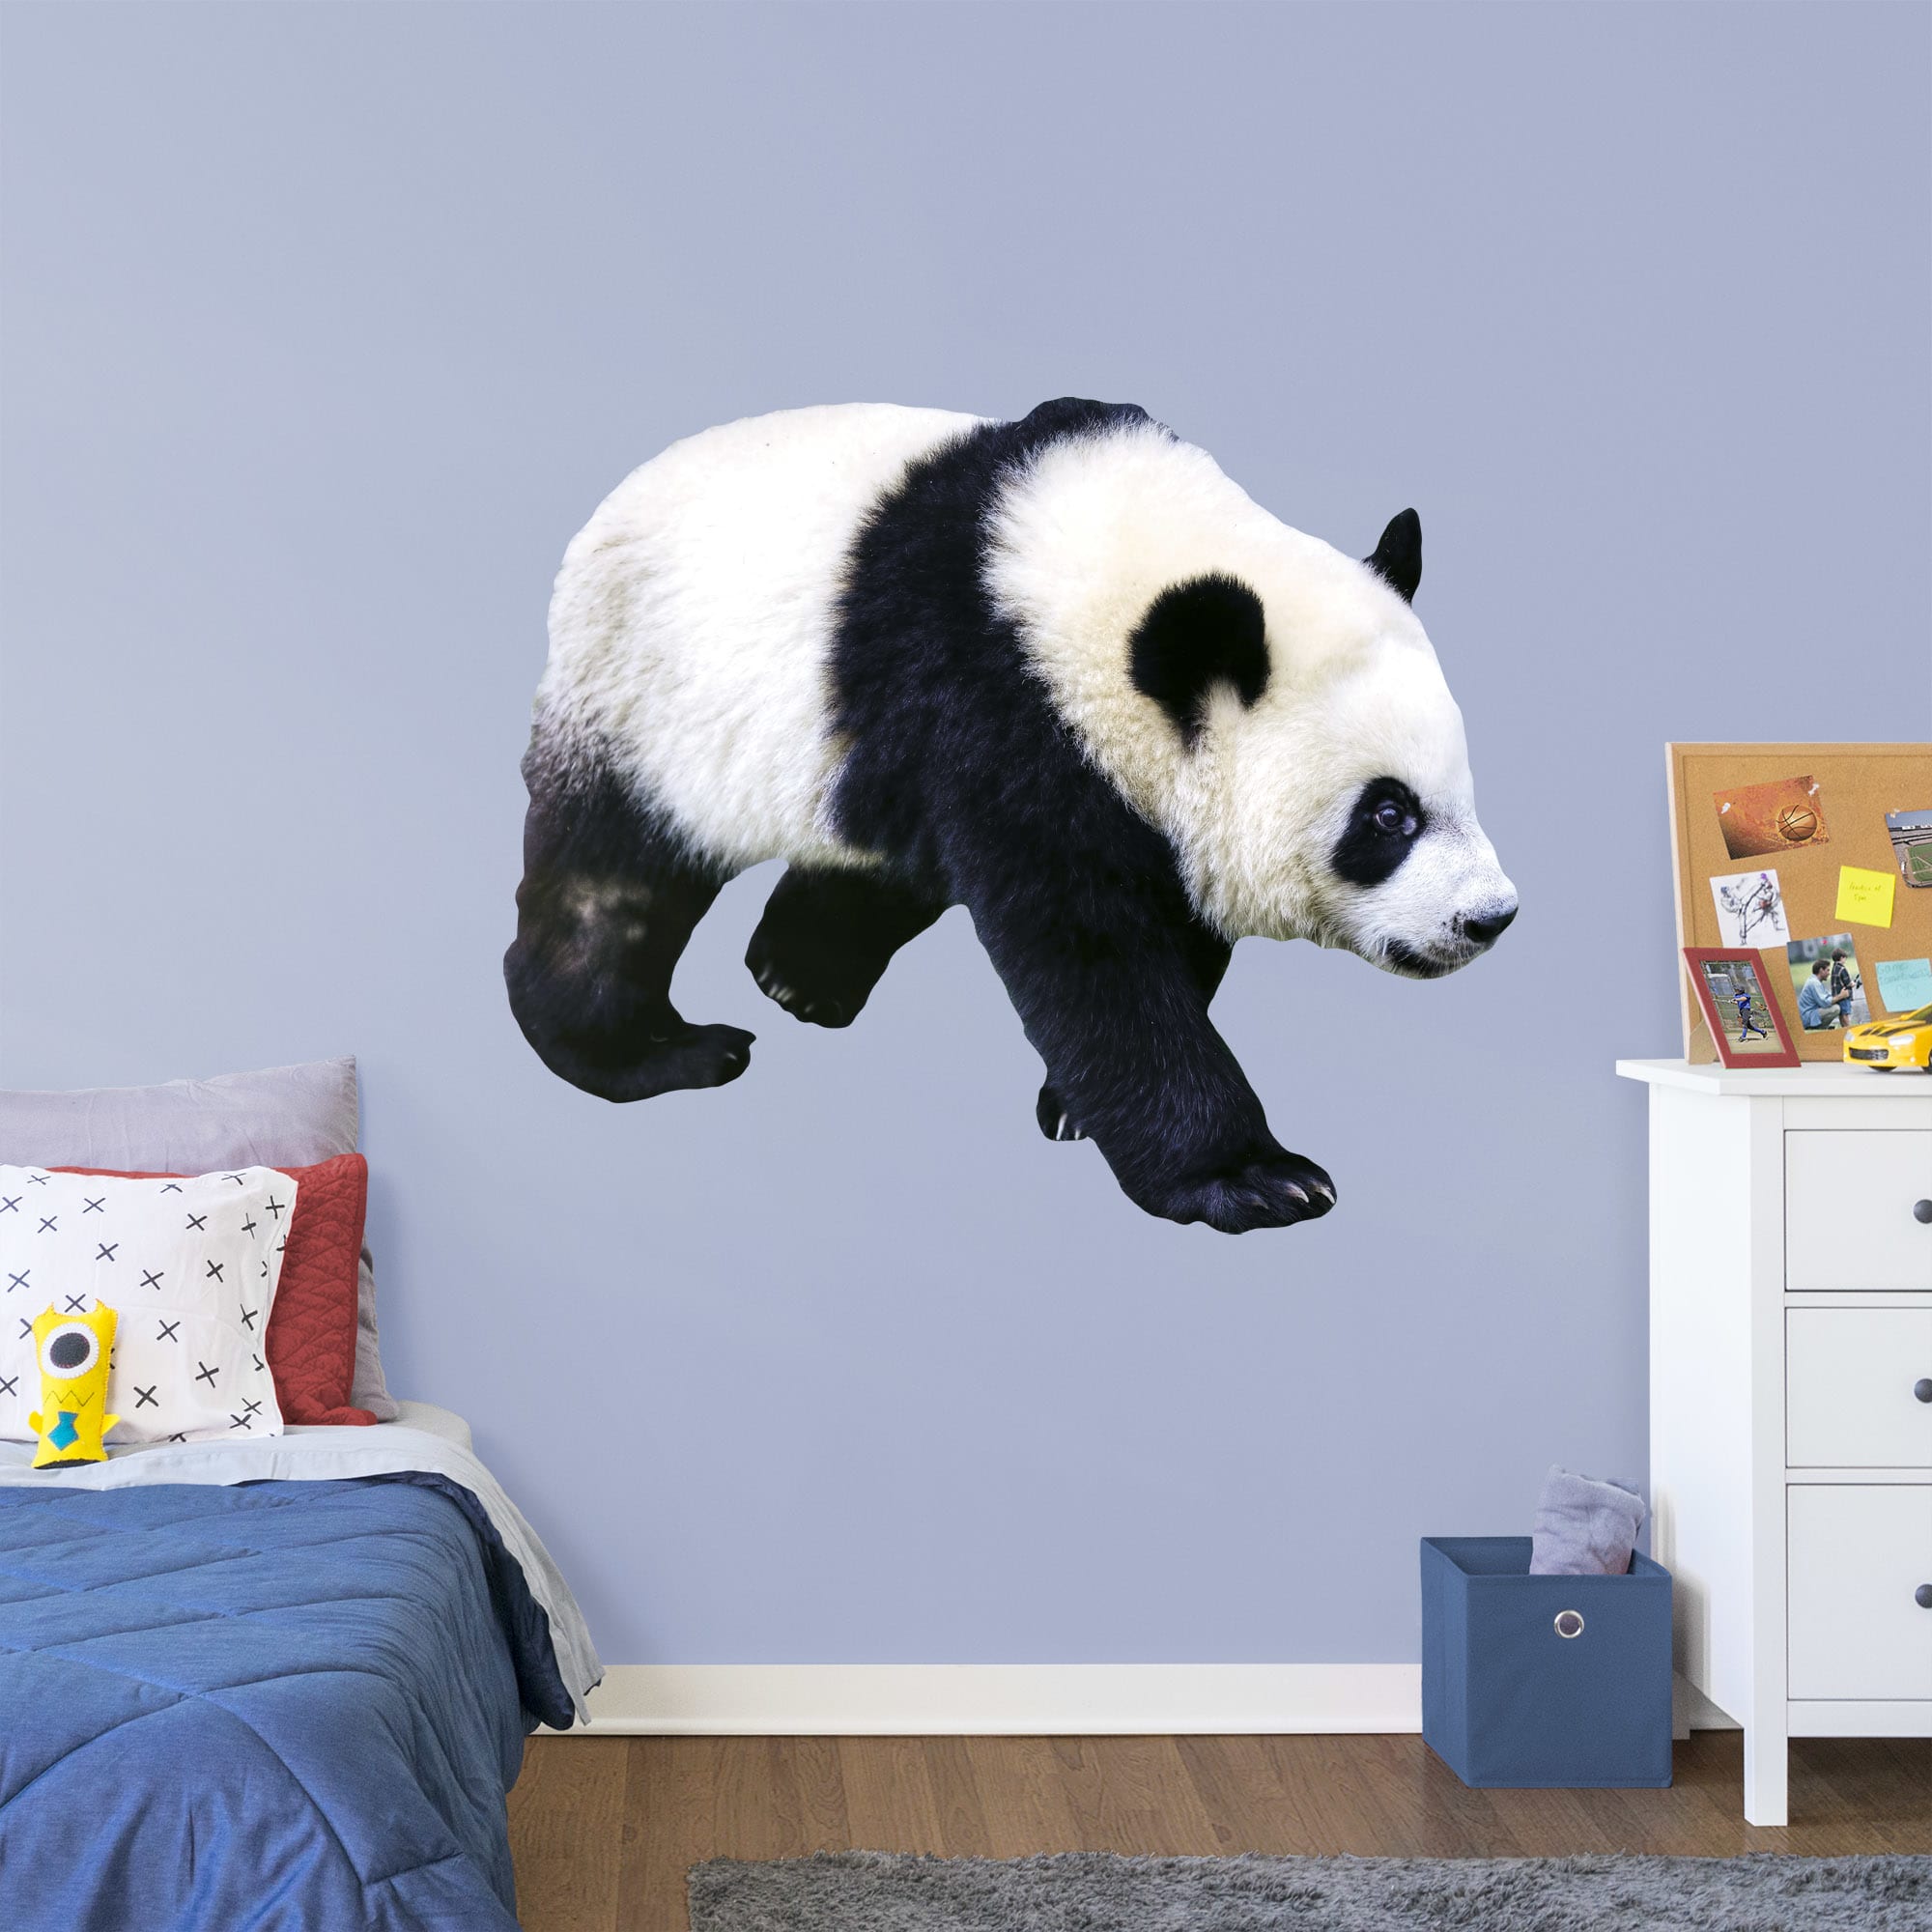 Panda - Removable Vinyl Decal Huge Animal + 2 Decals (62"W x 51"H) by Fathead